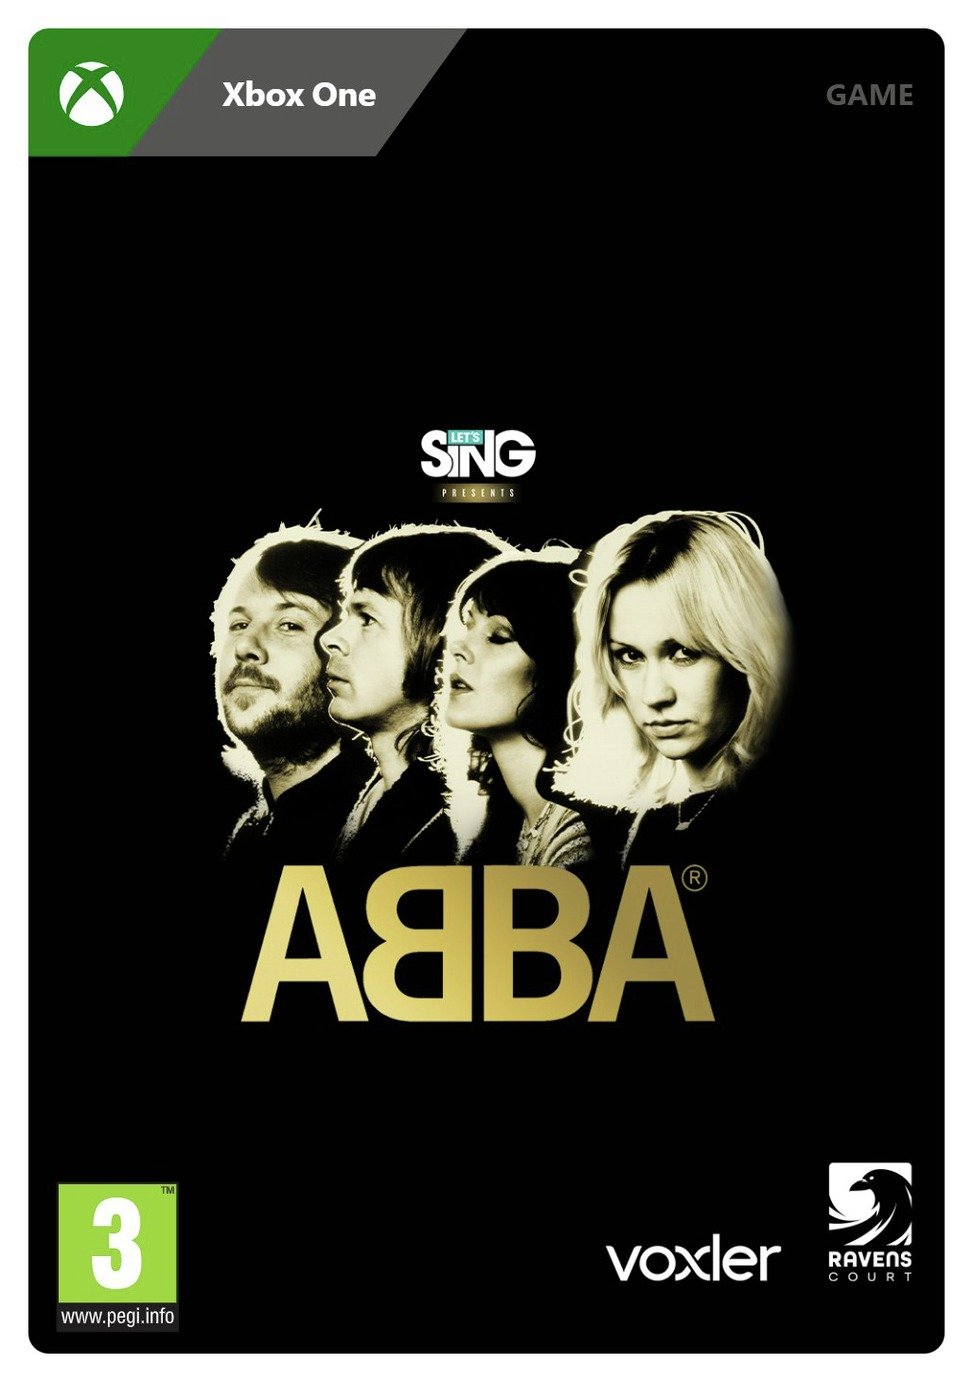 Let's Sing ABBA Xbox One Game